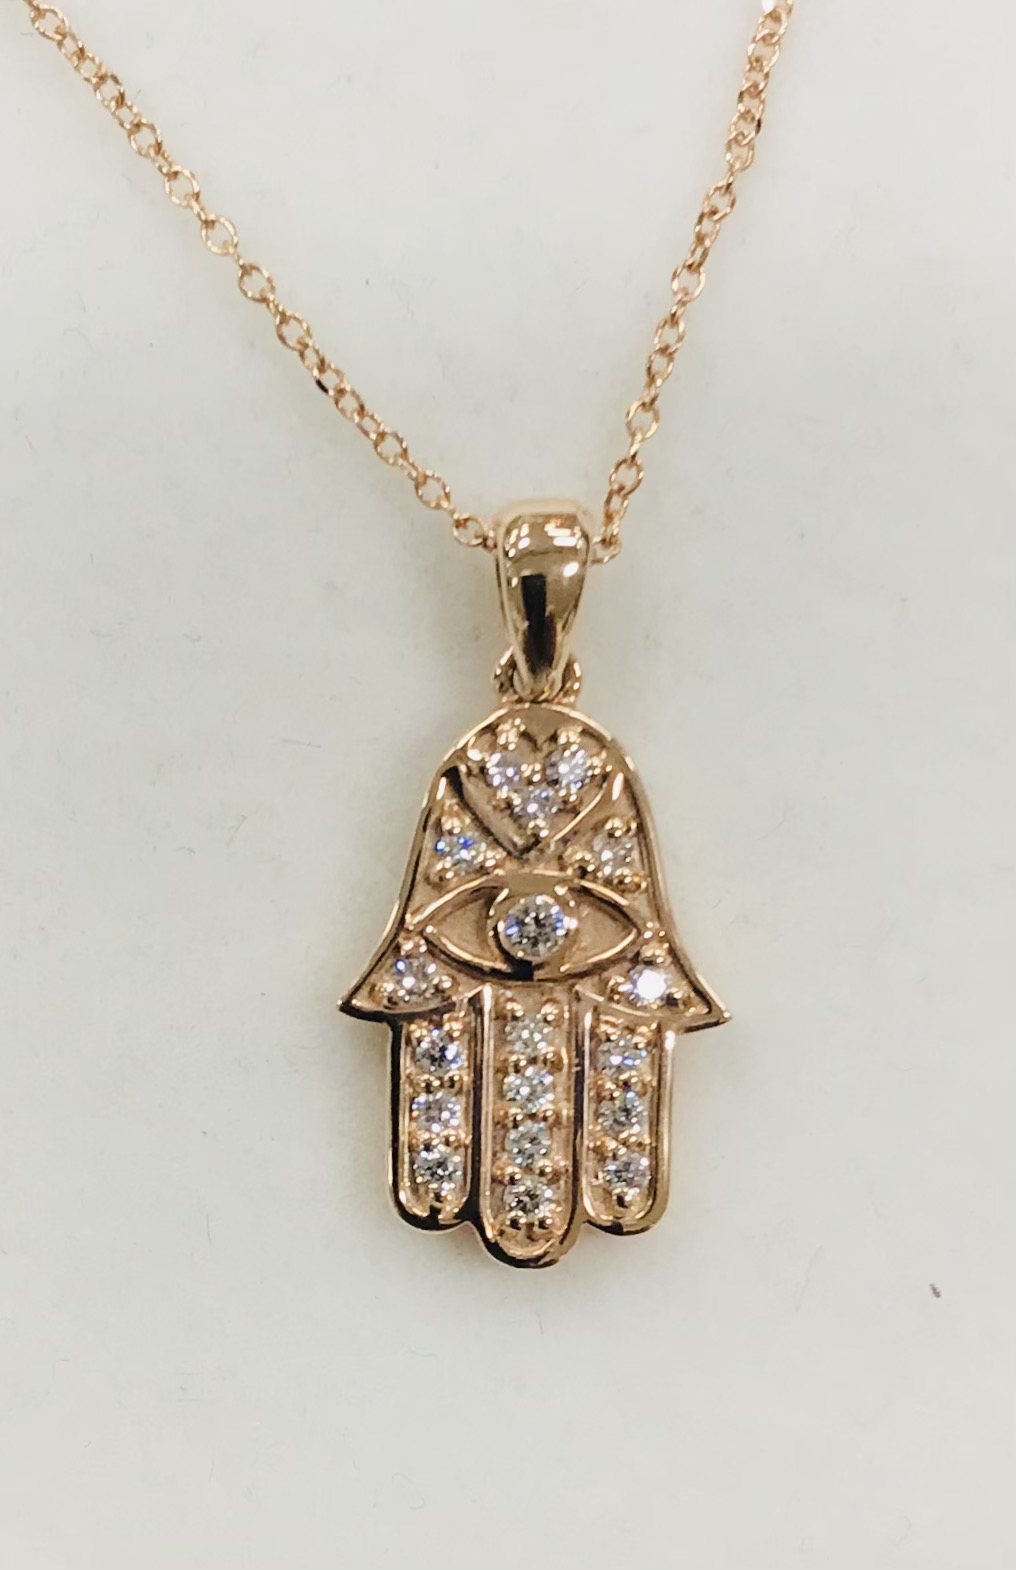 Gold Zircon Hamsa Hand Necklace With Copper Evil Eye Pendant And Chain Hip  Hop Turkish Luck Boho Jewelry From Beauty_collection, $5.71 | DHgate.Com